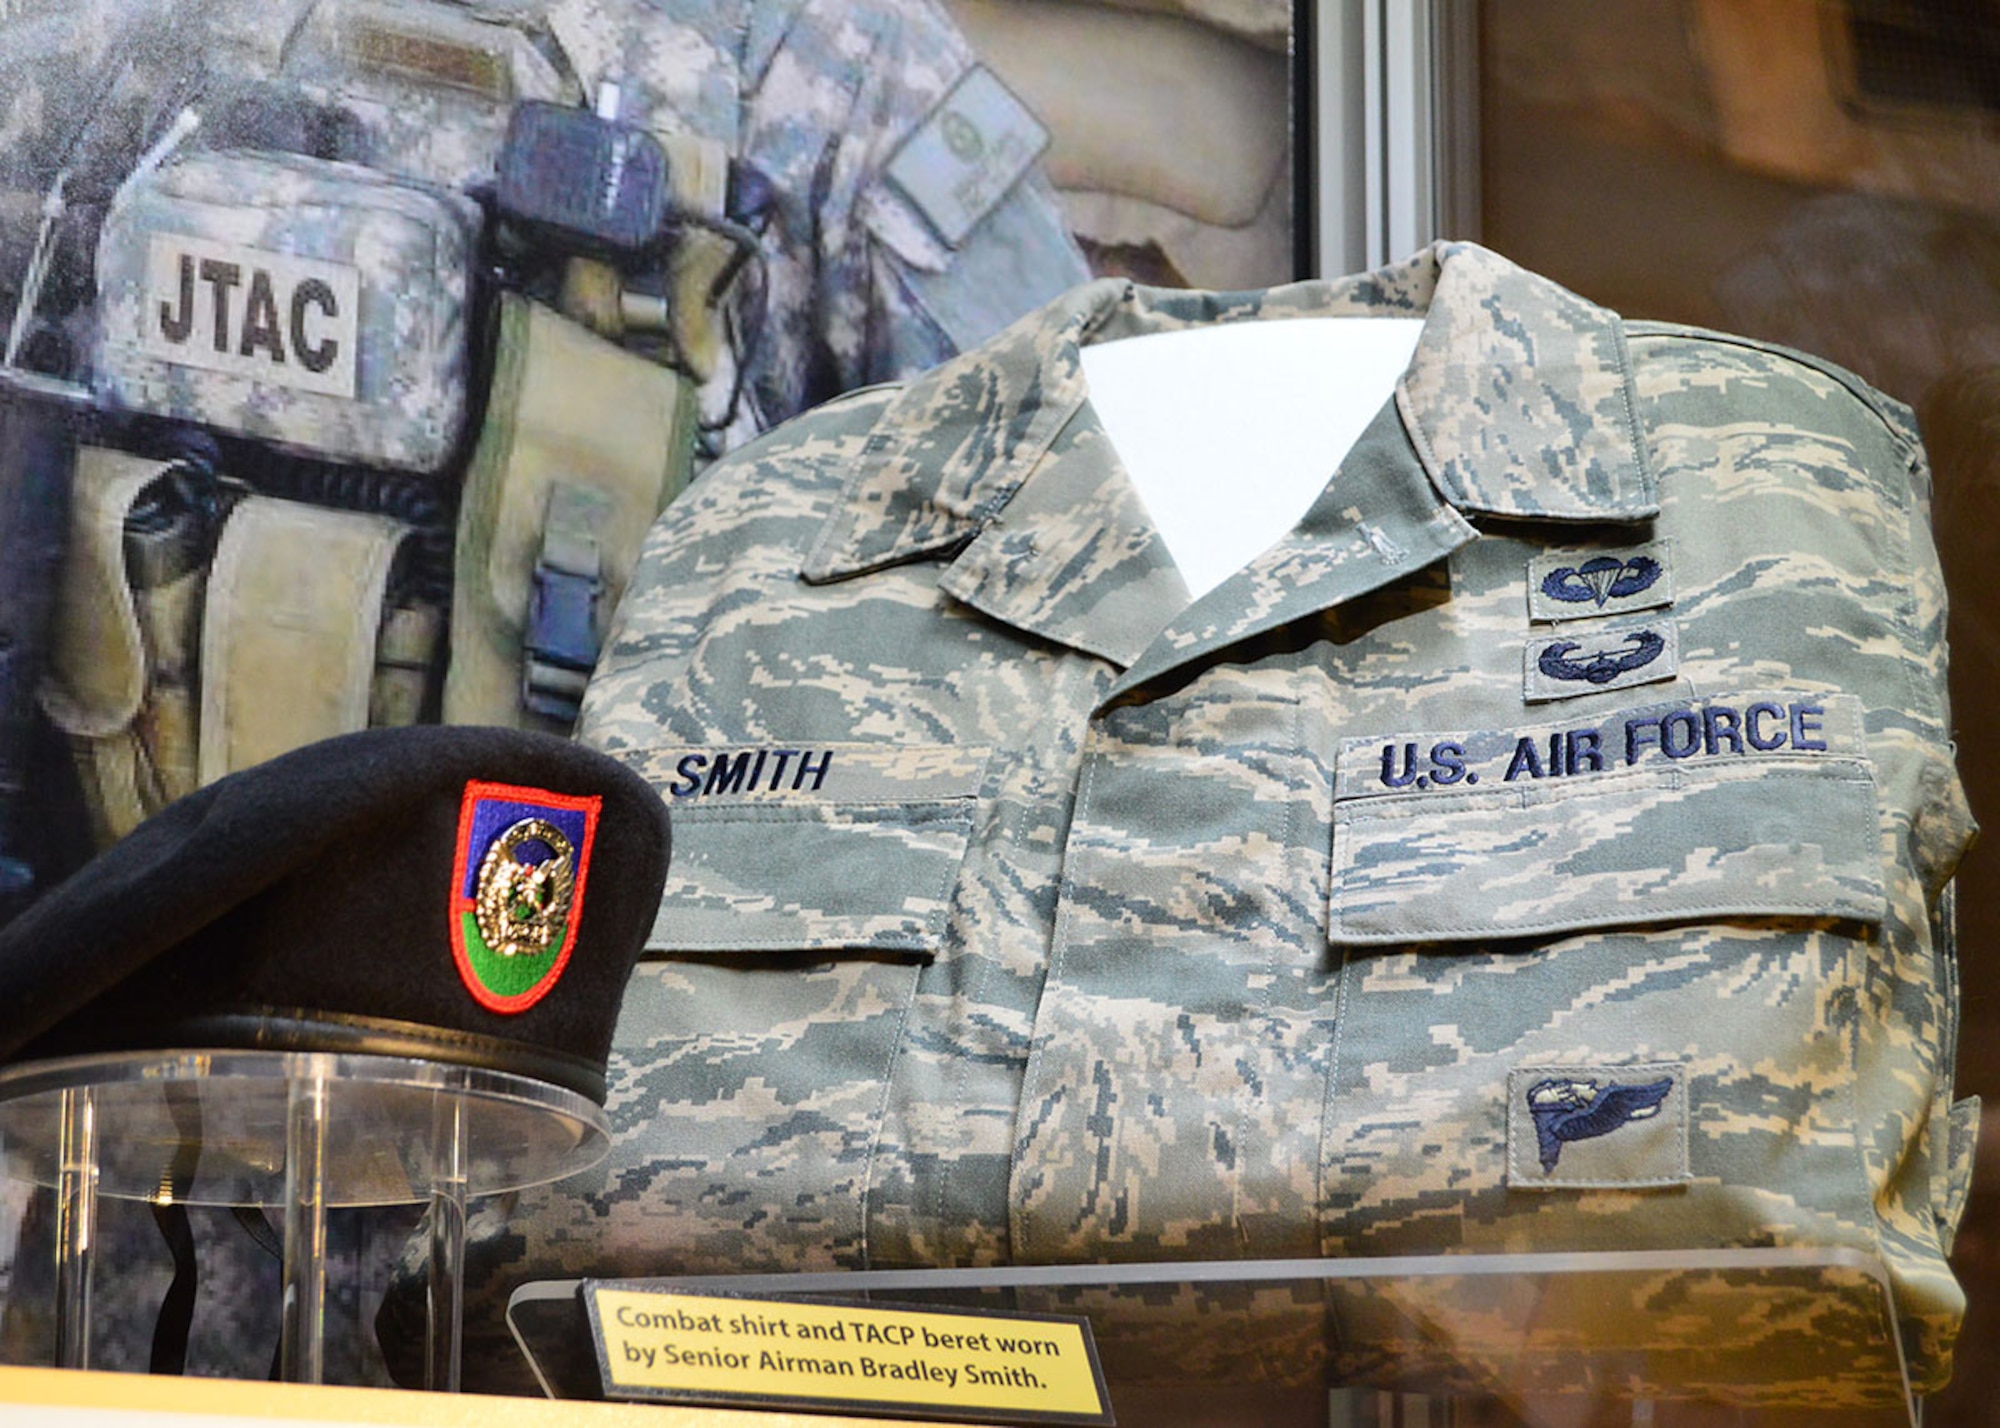 A TACP beret and ABU blouse worn by Senior Airman Bradley Smith is displayed in the “Duty First, Always Ready” exhibit, located in the Cold War Gallery at the National Museum of the U.S. Air Force, highlights the service of Senior Airmen Michael Malarsie and Bradley Smith, a two-man Joint Terminal Attack Controller team who deployed together to Afghanistan in December 2009.  (Courtesy photo)